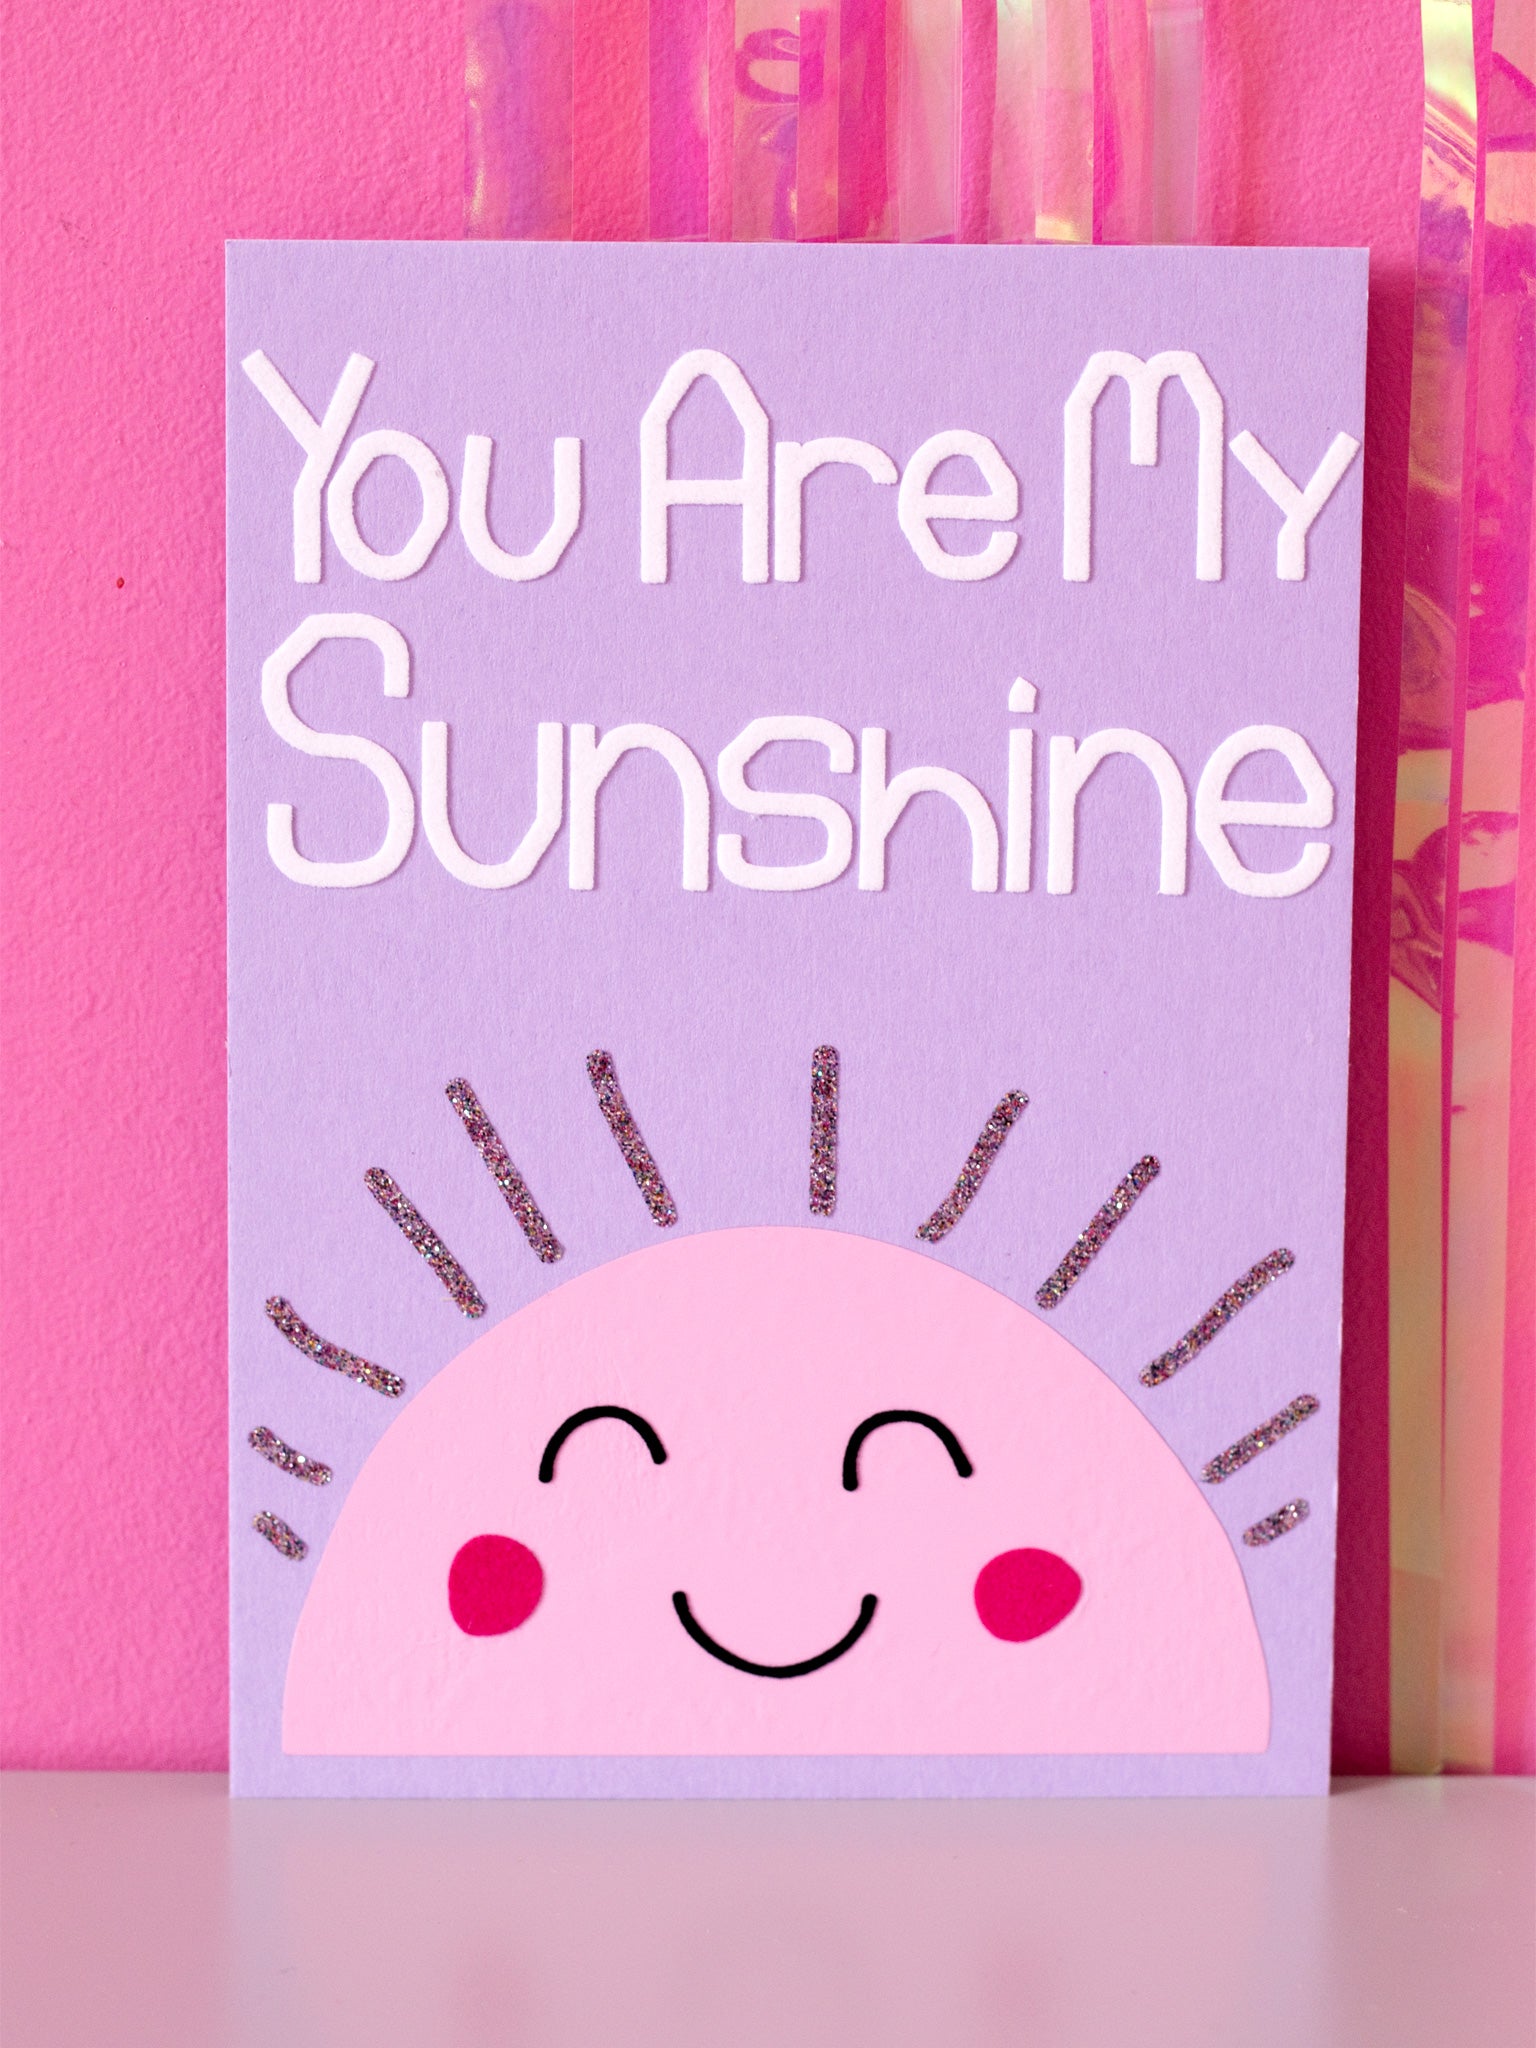 Art print with You Are My Sunshine in flocked font on top of a pink, simple drawn sun, with glittery beams and a cute face, sitting in front of a pink wall.